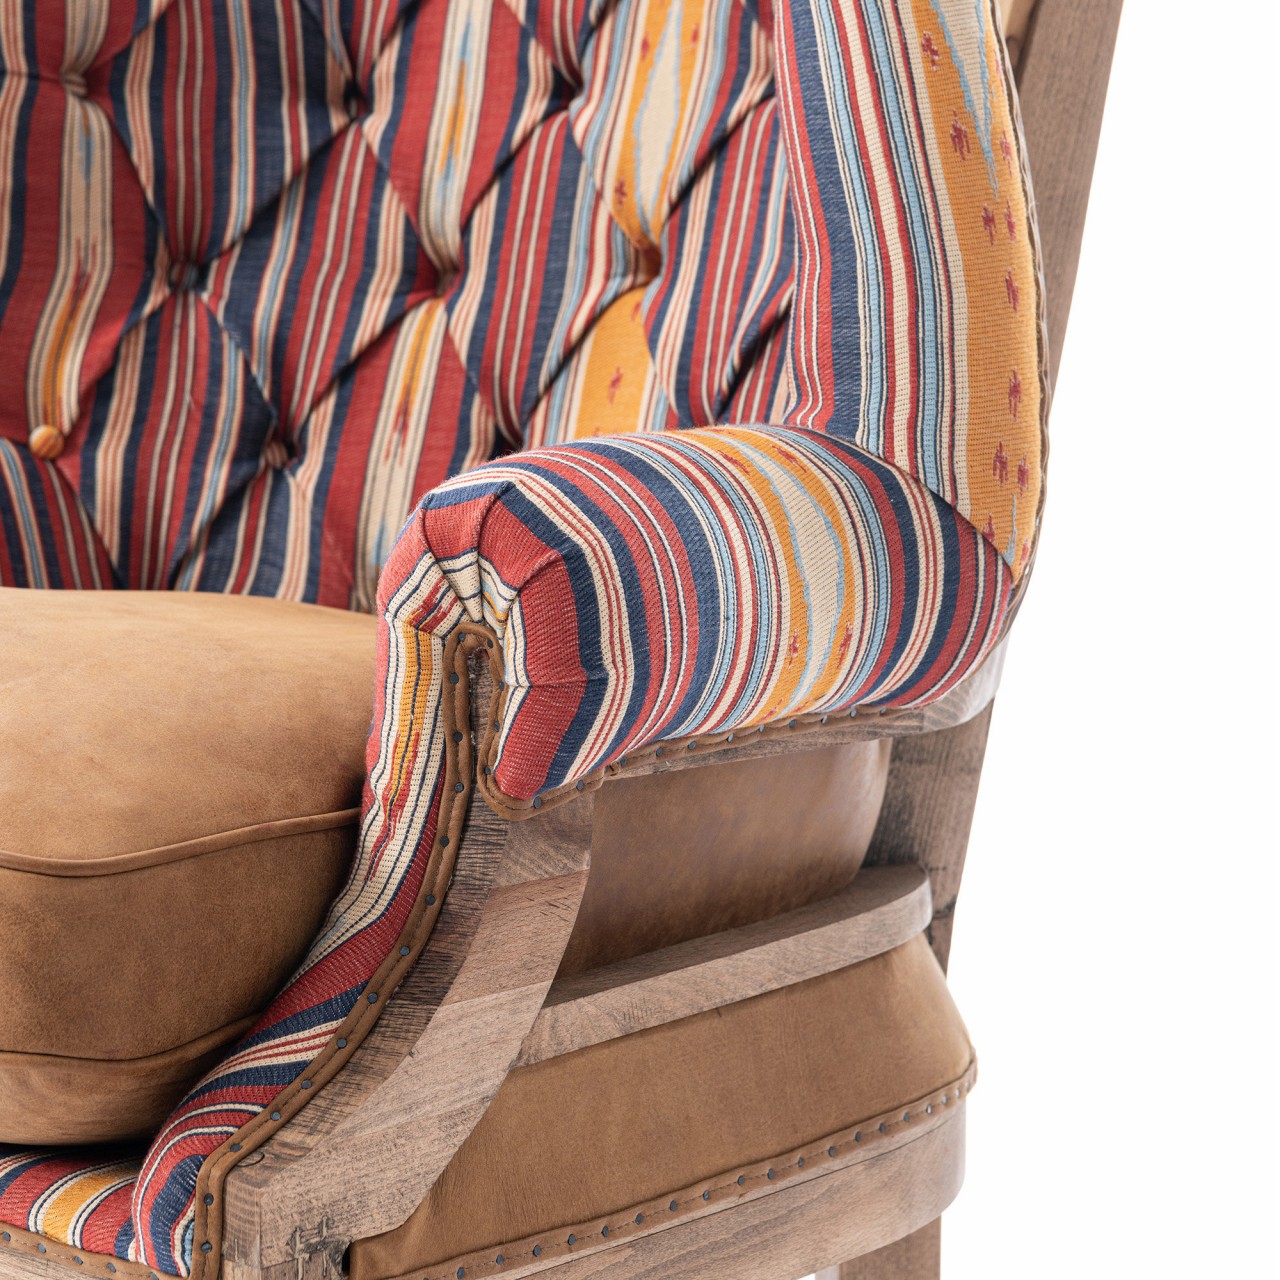 WILLIAM DECONSTRUCTED WING CHAIR (Leather seat cushion) - NEYSHABOUR Woven Fabric